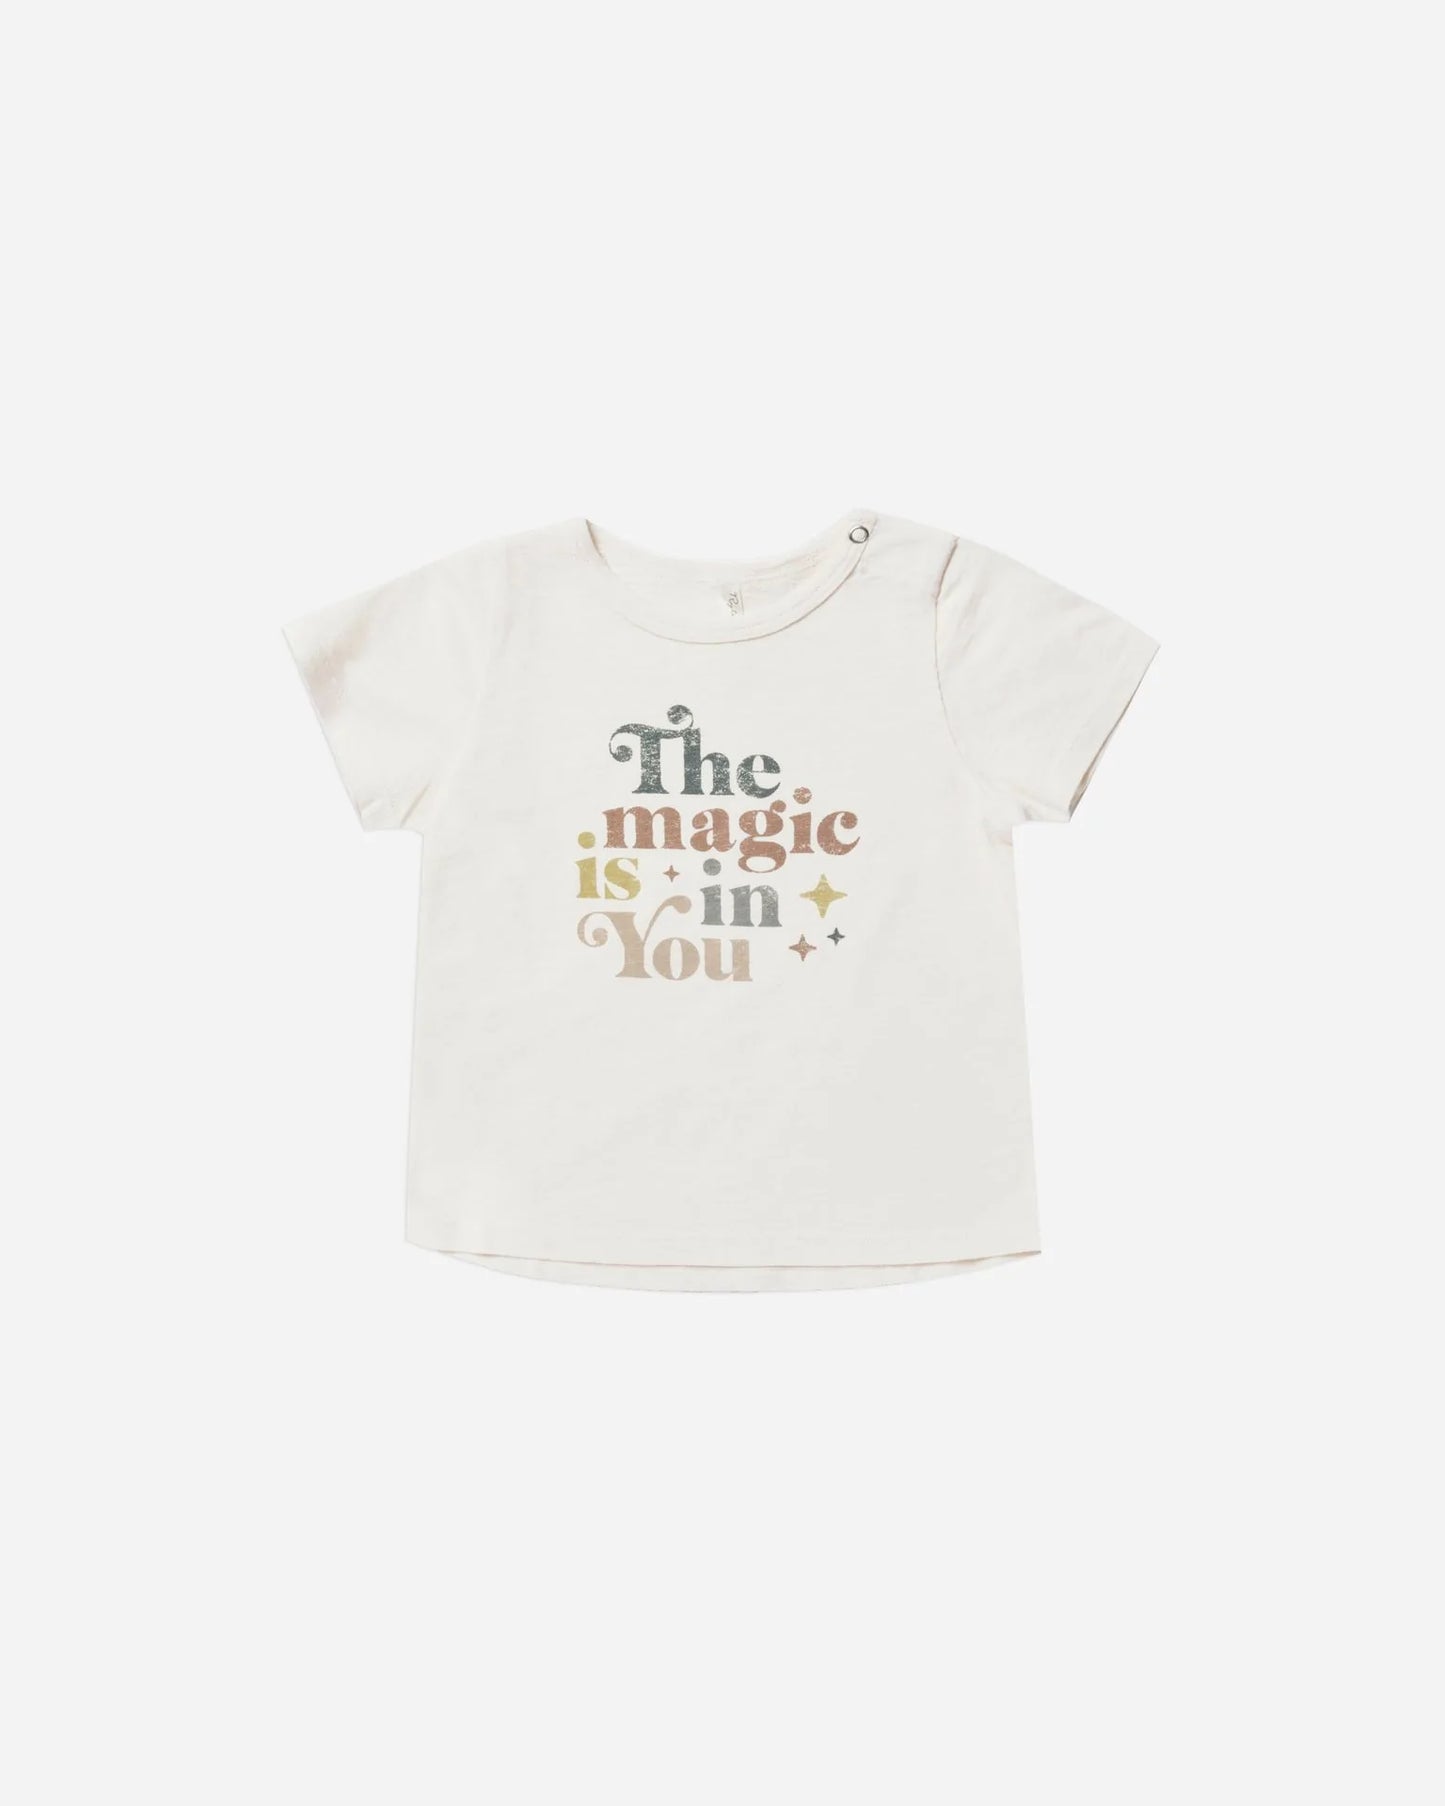 Basic Tee in The Magic Is In You  - Doodlebug's Children's Boutique